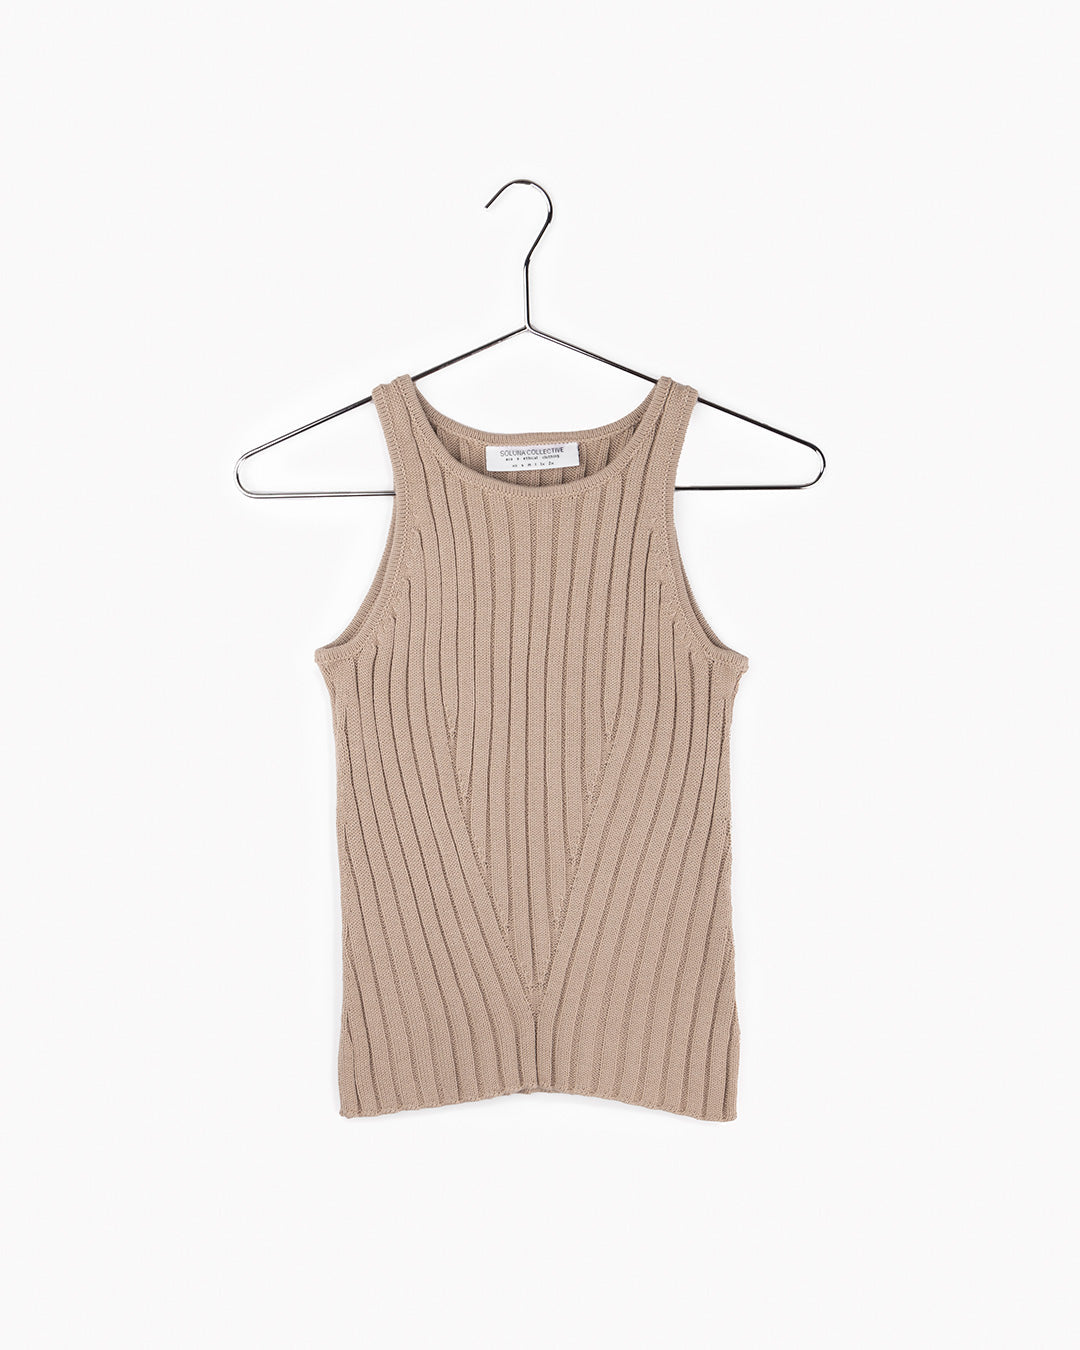 This photo shows a flat lay of the sand knit tank showing the ribbed pattern.